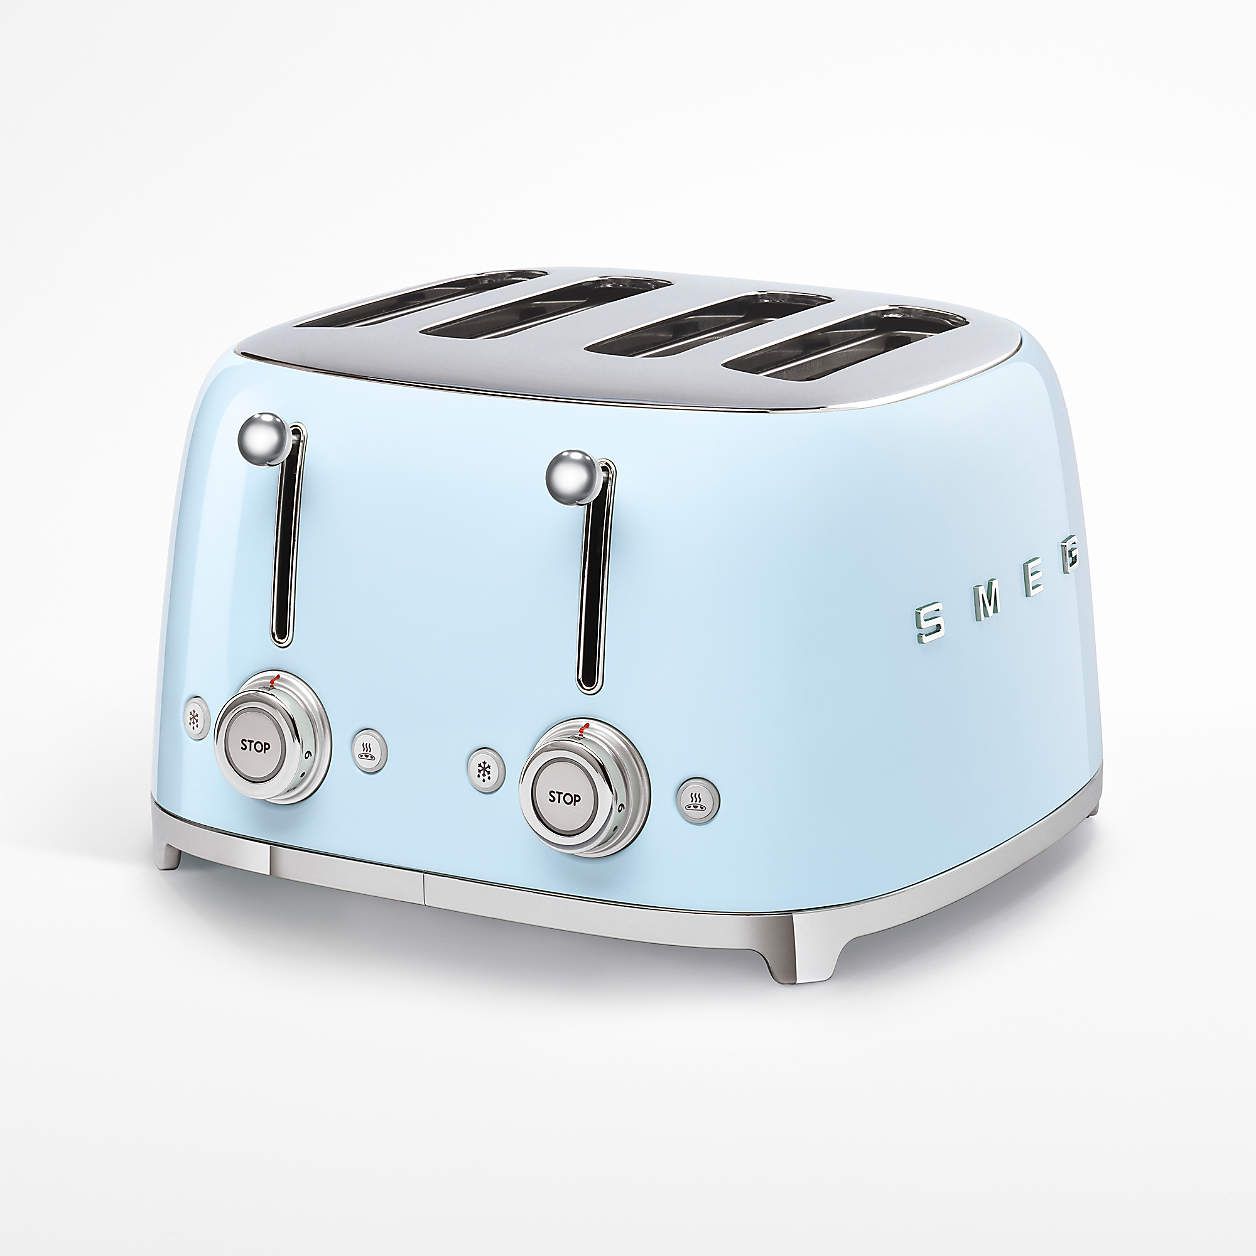 11 Best Double Slice Toasters - Our Picks, Alternatives & Reviews 